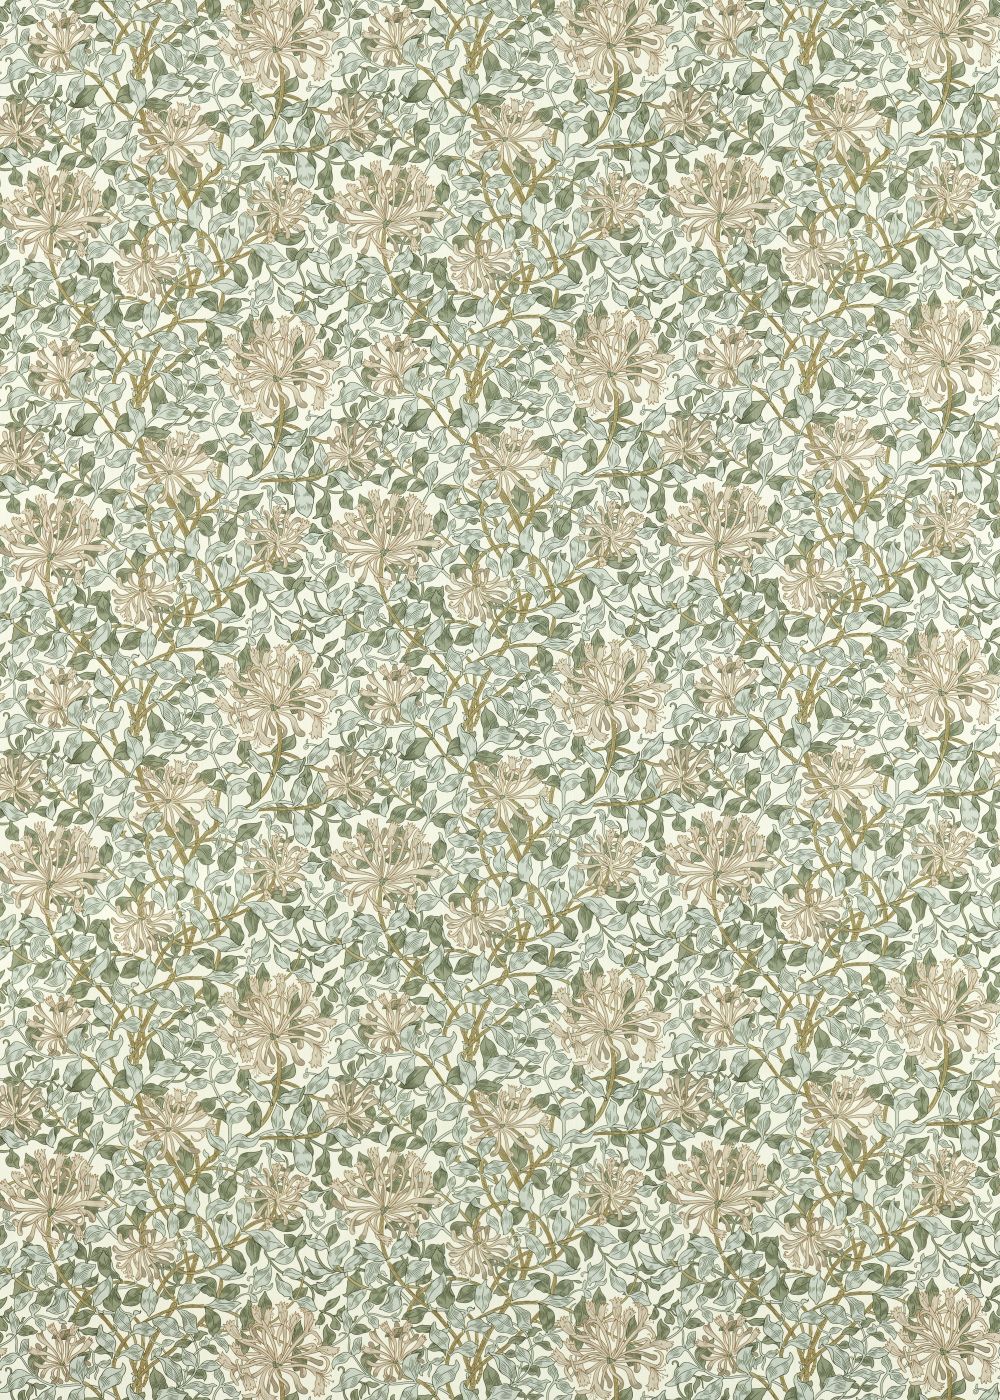 Honeysuckle Fabric - Sage / Clay - by Morris